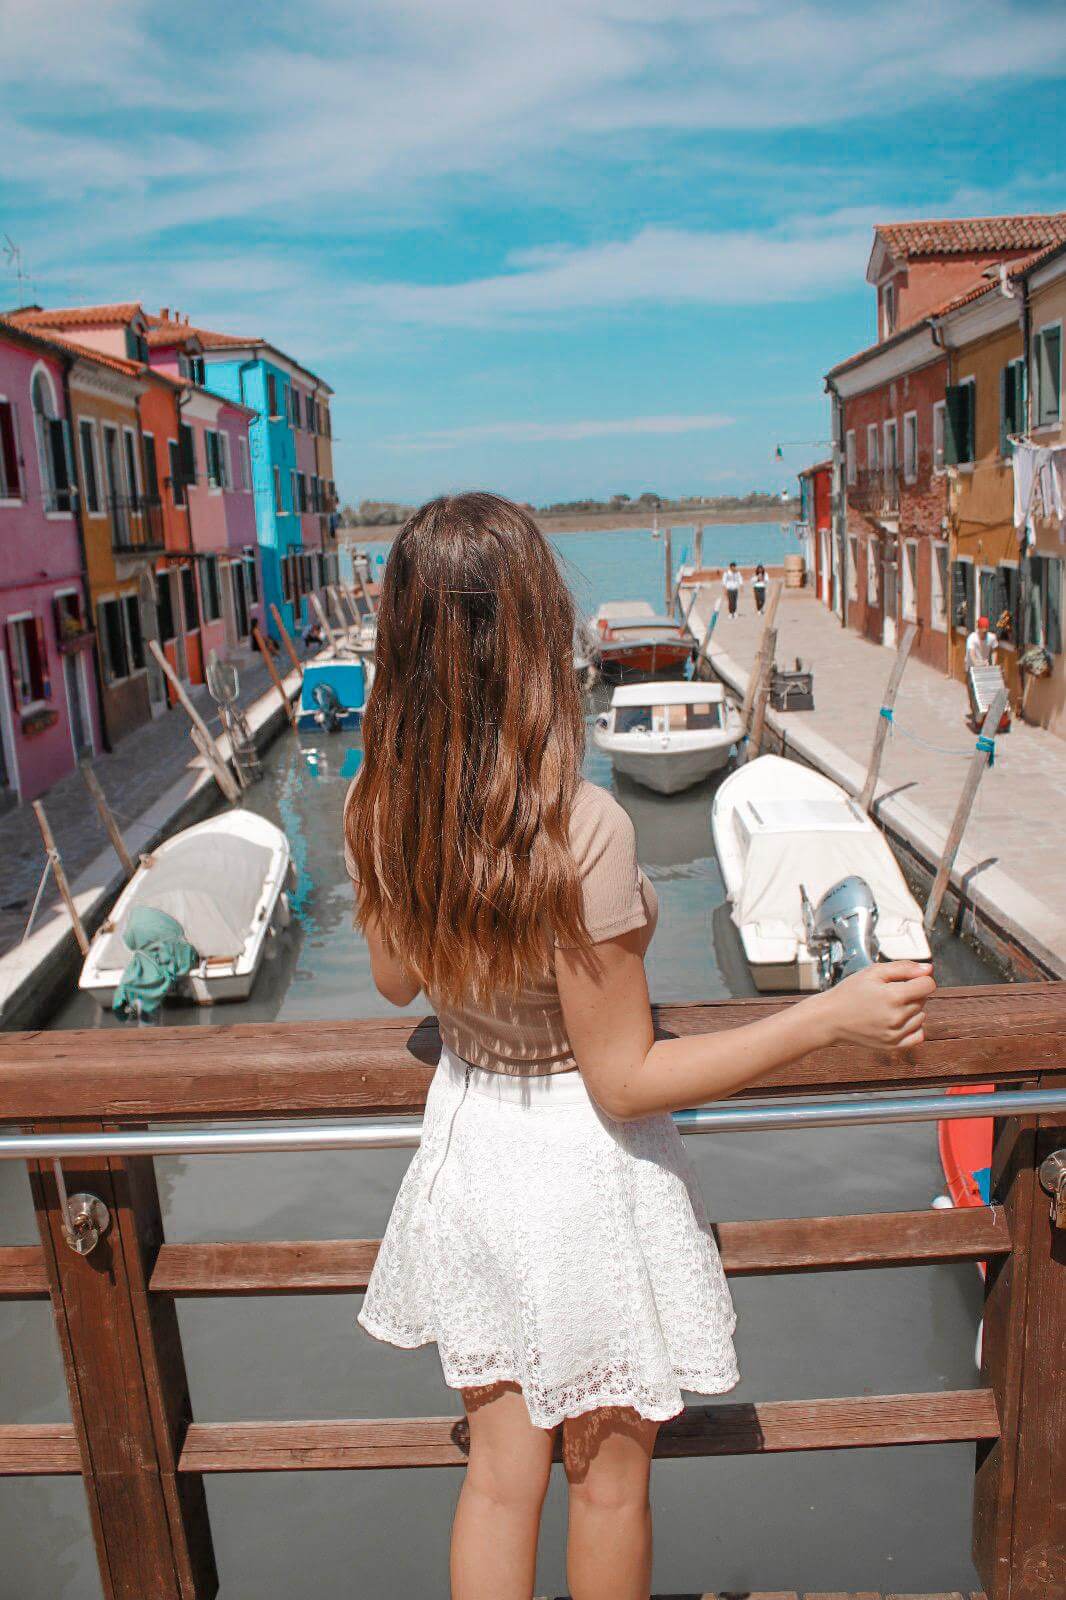 The 5 most beautiful sights & photo locations in Venice & How to avoid the tourist crowds in Venice